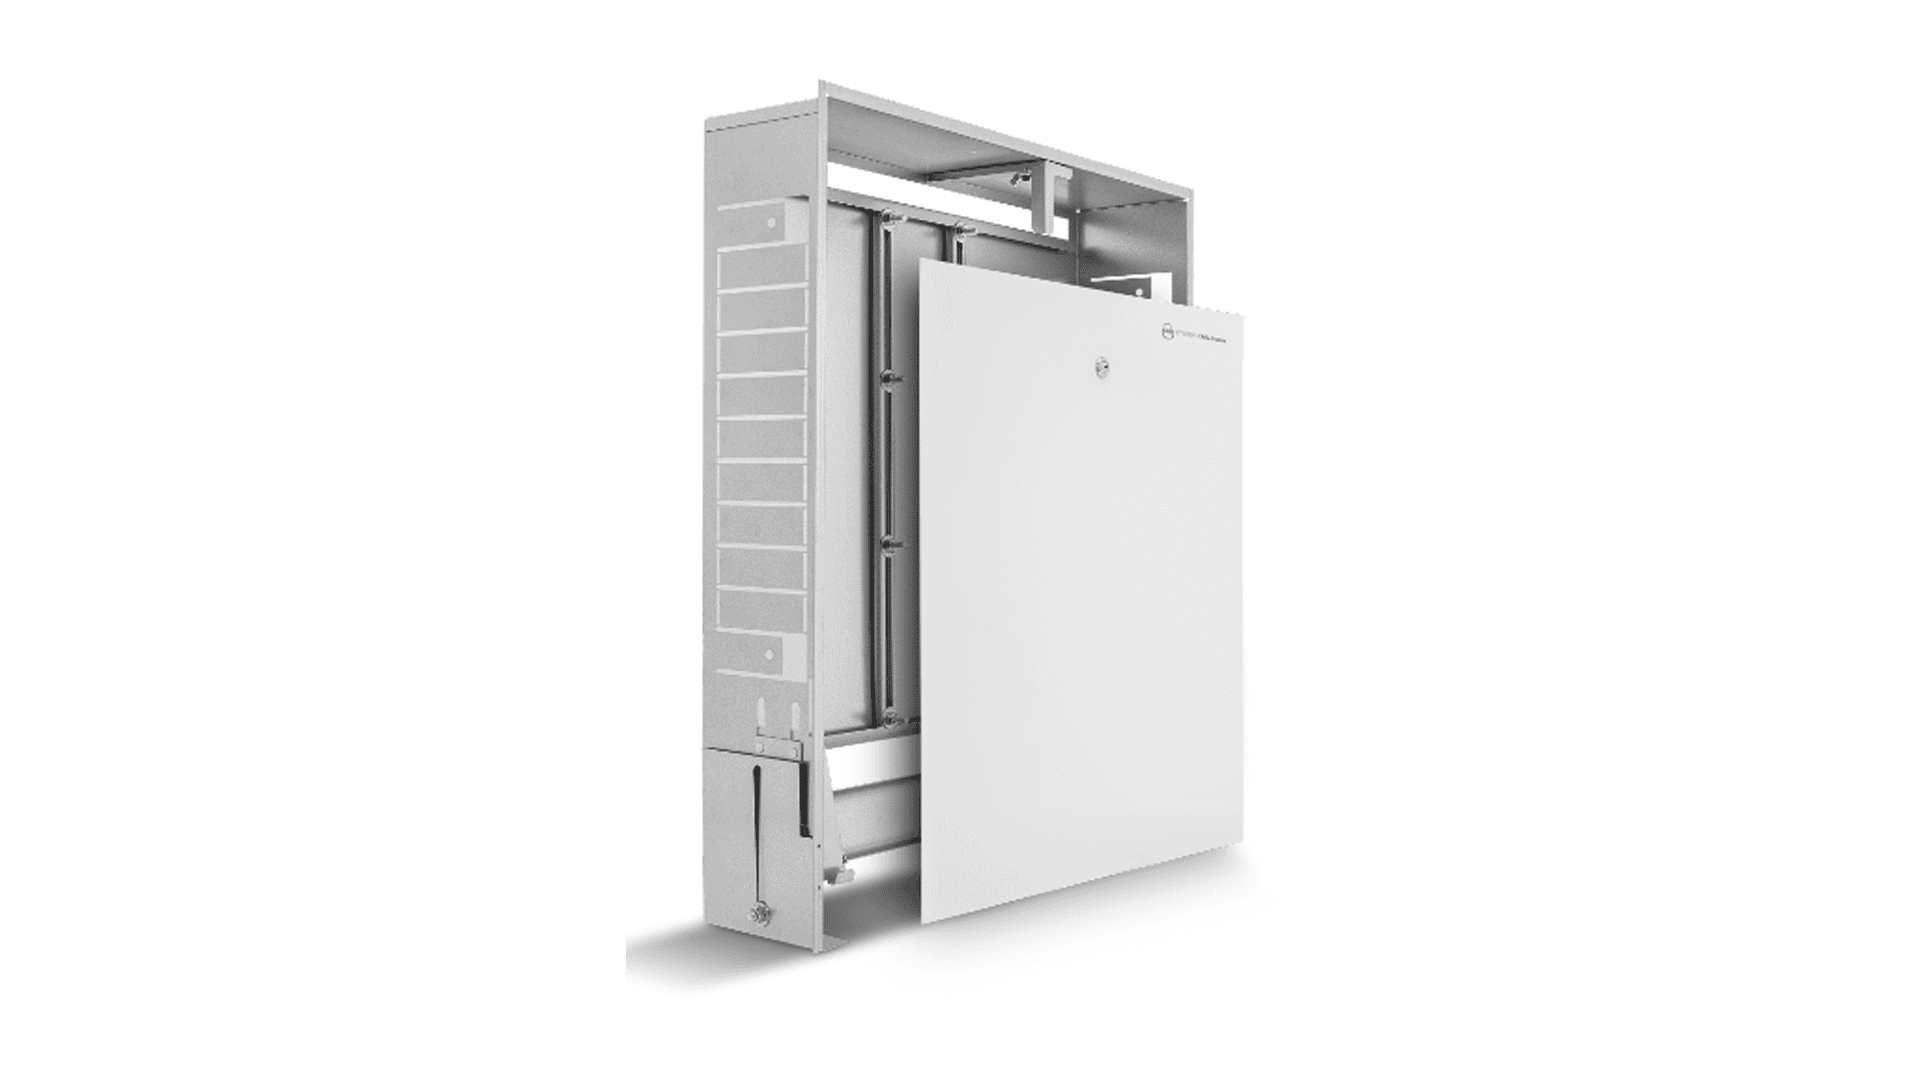 KAN-therm - Installation cabinets Slim and Slim+ - Flush-mounted cabinet for radiator heating, cooling or domestic water installations